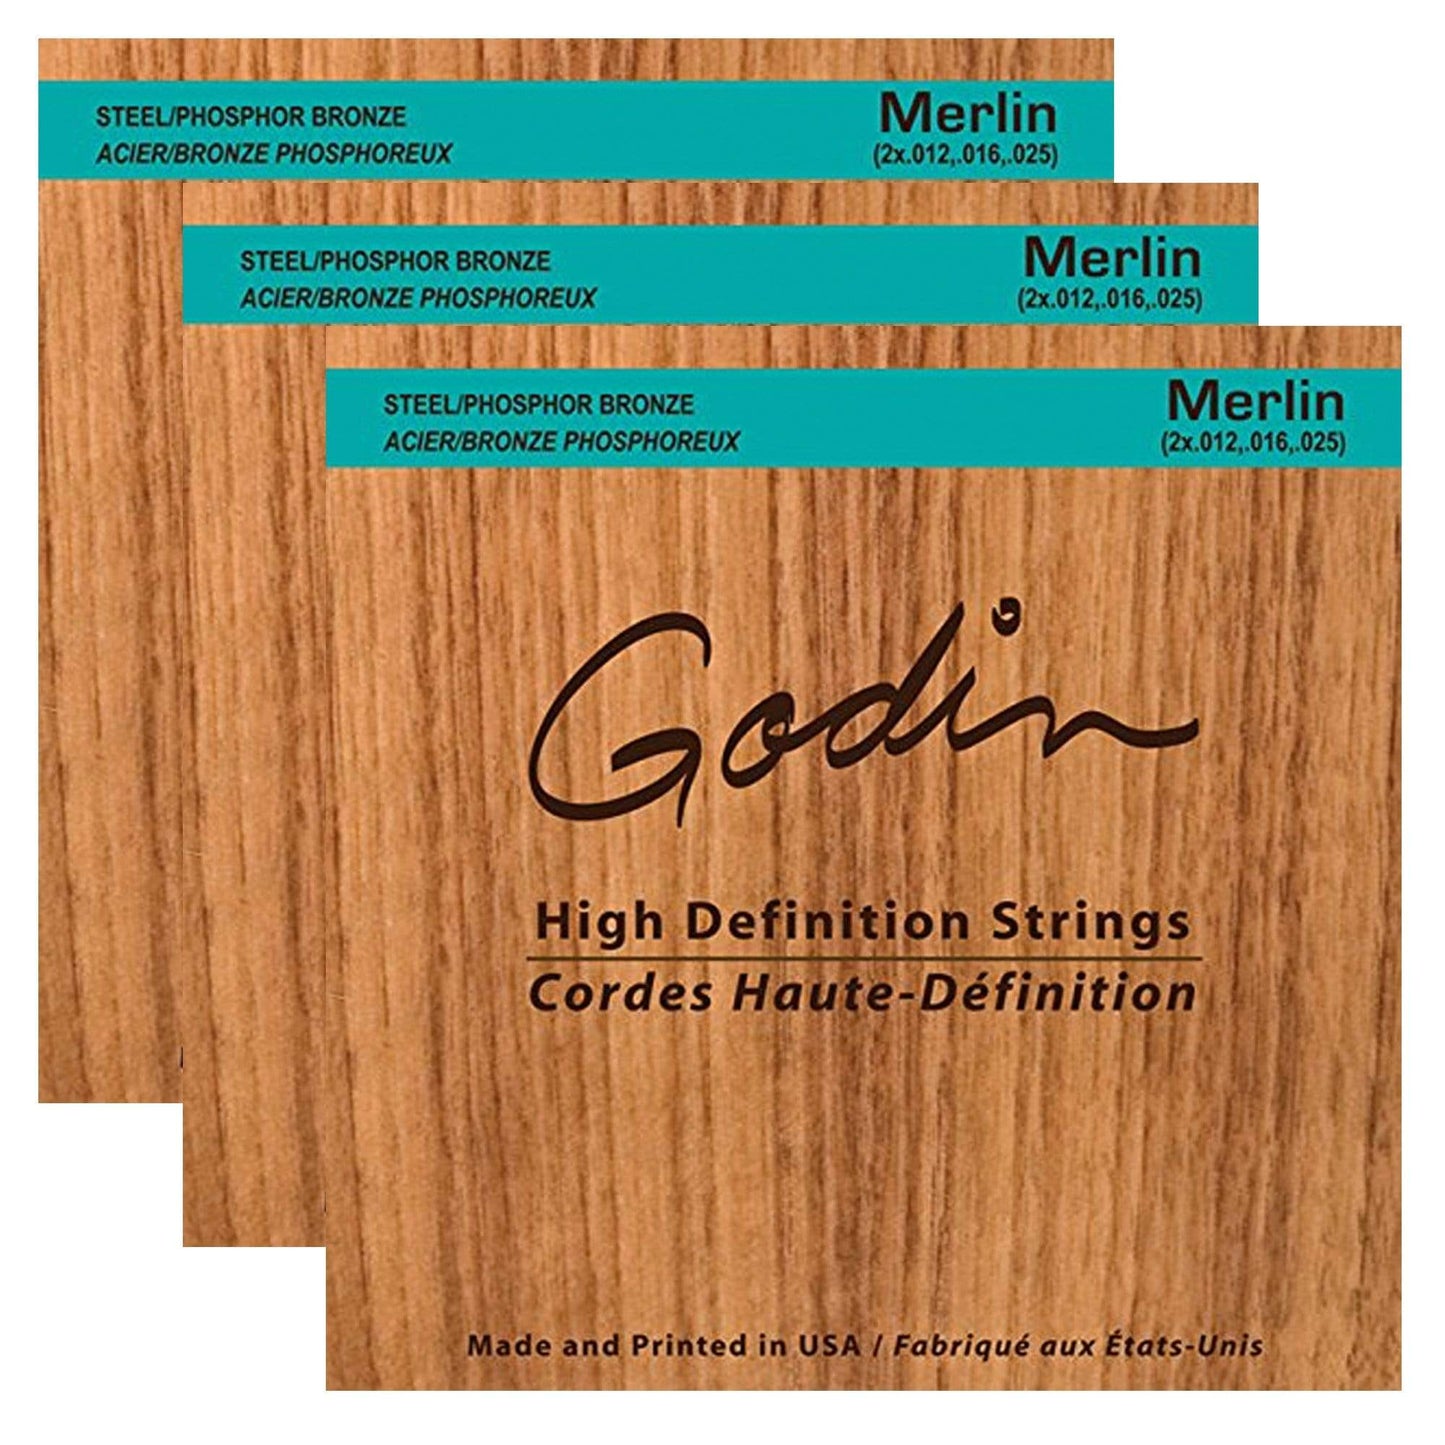 Seagull Merlin High-Definition Strings 12-25 (3 Pack Bundle) Accessories / Straps,Accessories / Strings / Guitar Strings,Accessories / Strings / Other Strings